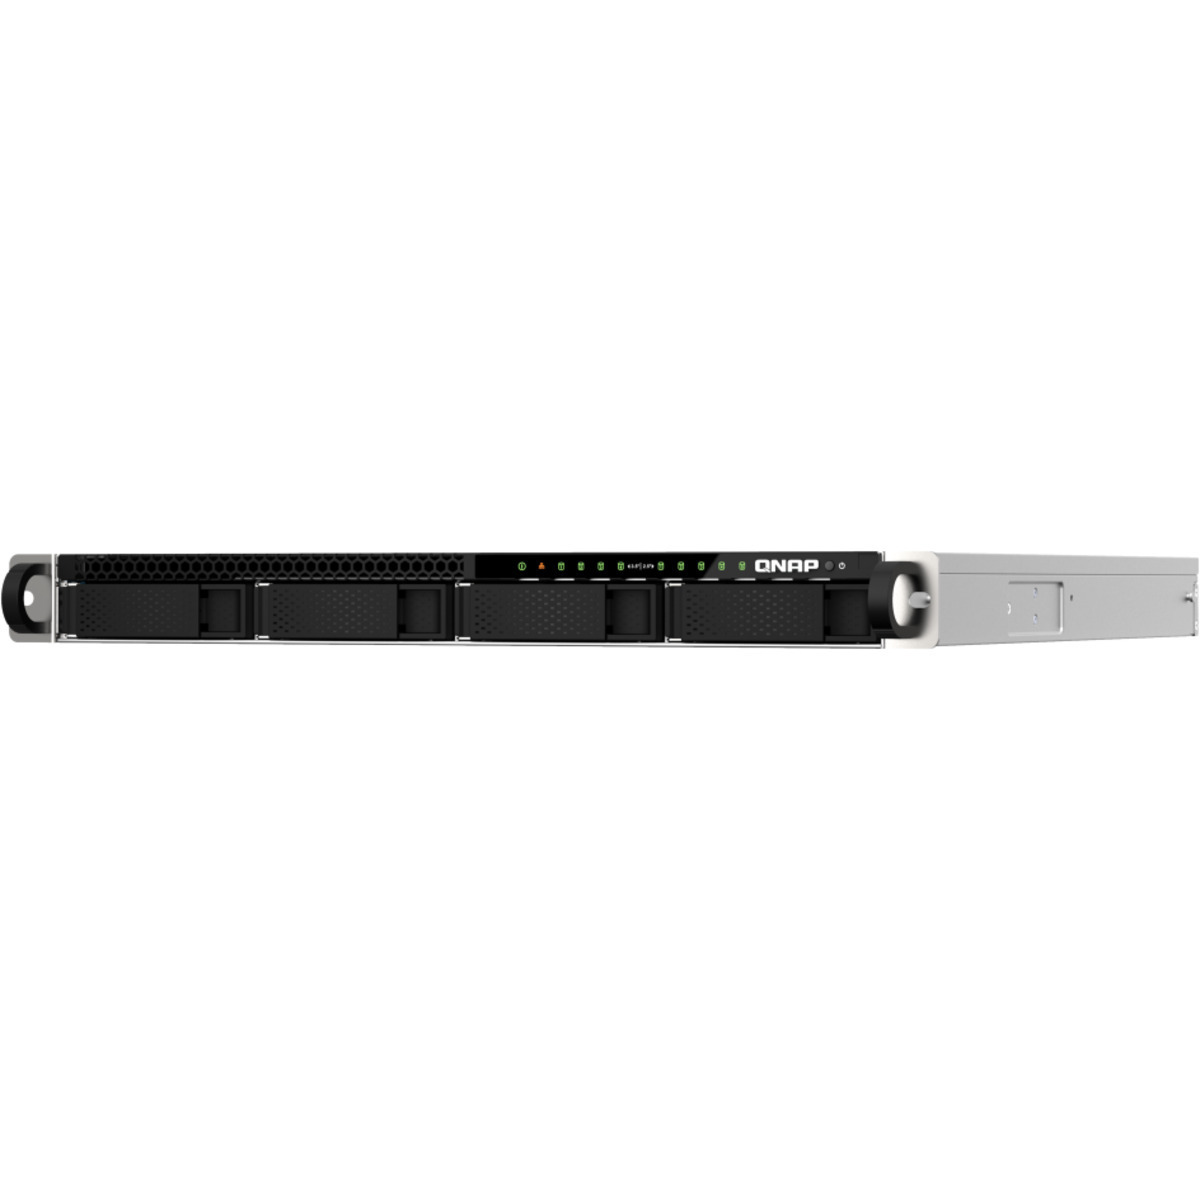 buy QNAP TS-h987XU-RP QuTS hero Edition 8tb RackMount NAS - Network Attached Storage Device 4x2000gb Seagate IronWolf Pro ST2000NT001 3.5 7200rpm SATA 6Gb/s HDD NAS Class Drives Installed - Burn-In Tested - nas headquarters buy network attached storage server device das new raid-5 free shipping simply usa TS-h987XU-RP QuTS hero Edition